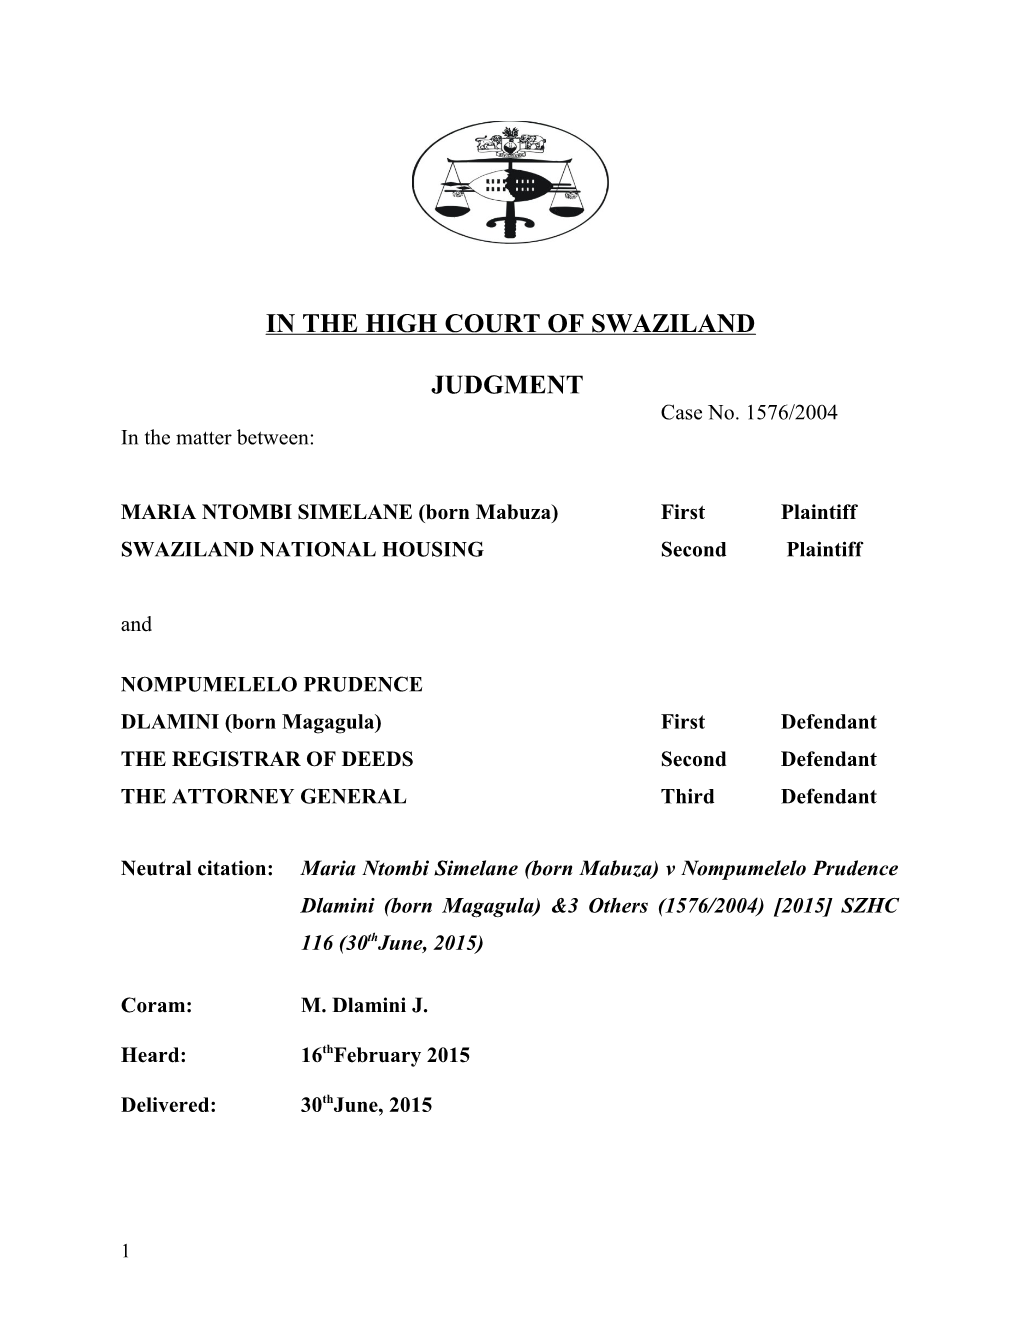 In the High Court of Swaziland s8